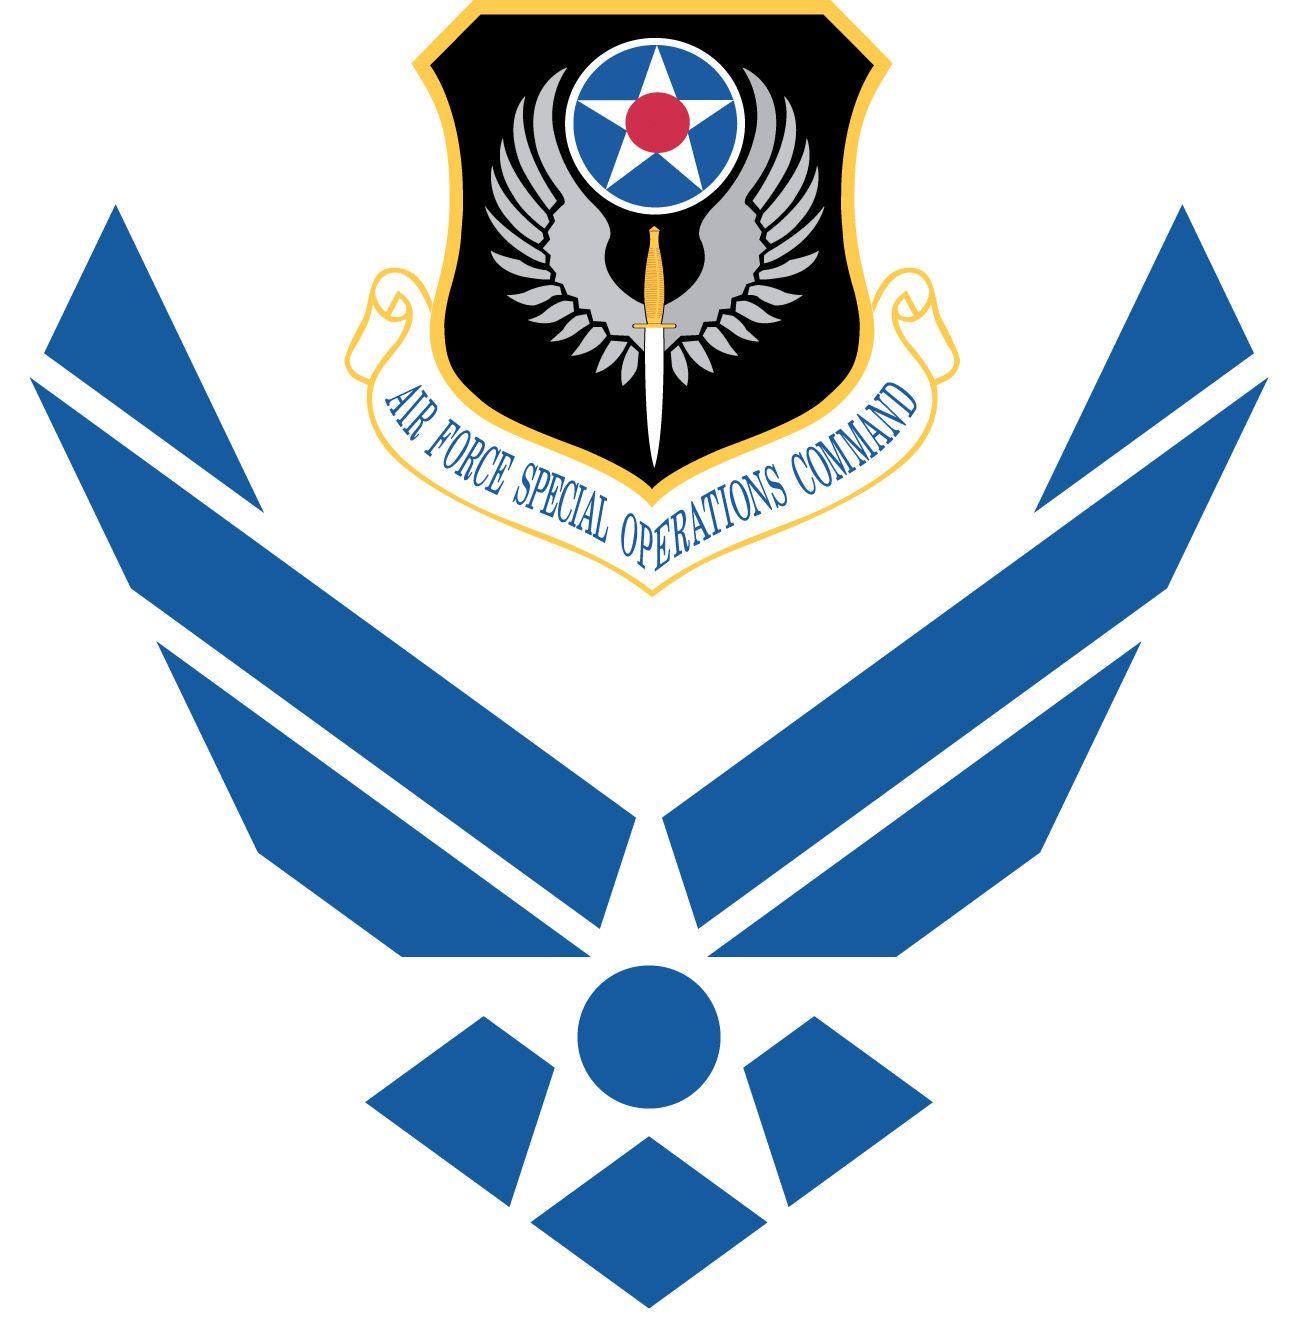 AFSOC Logo - Air Force symbol with cradled AFSOC shield